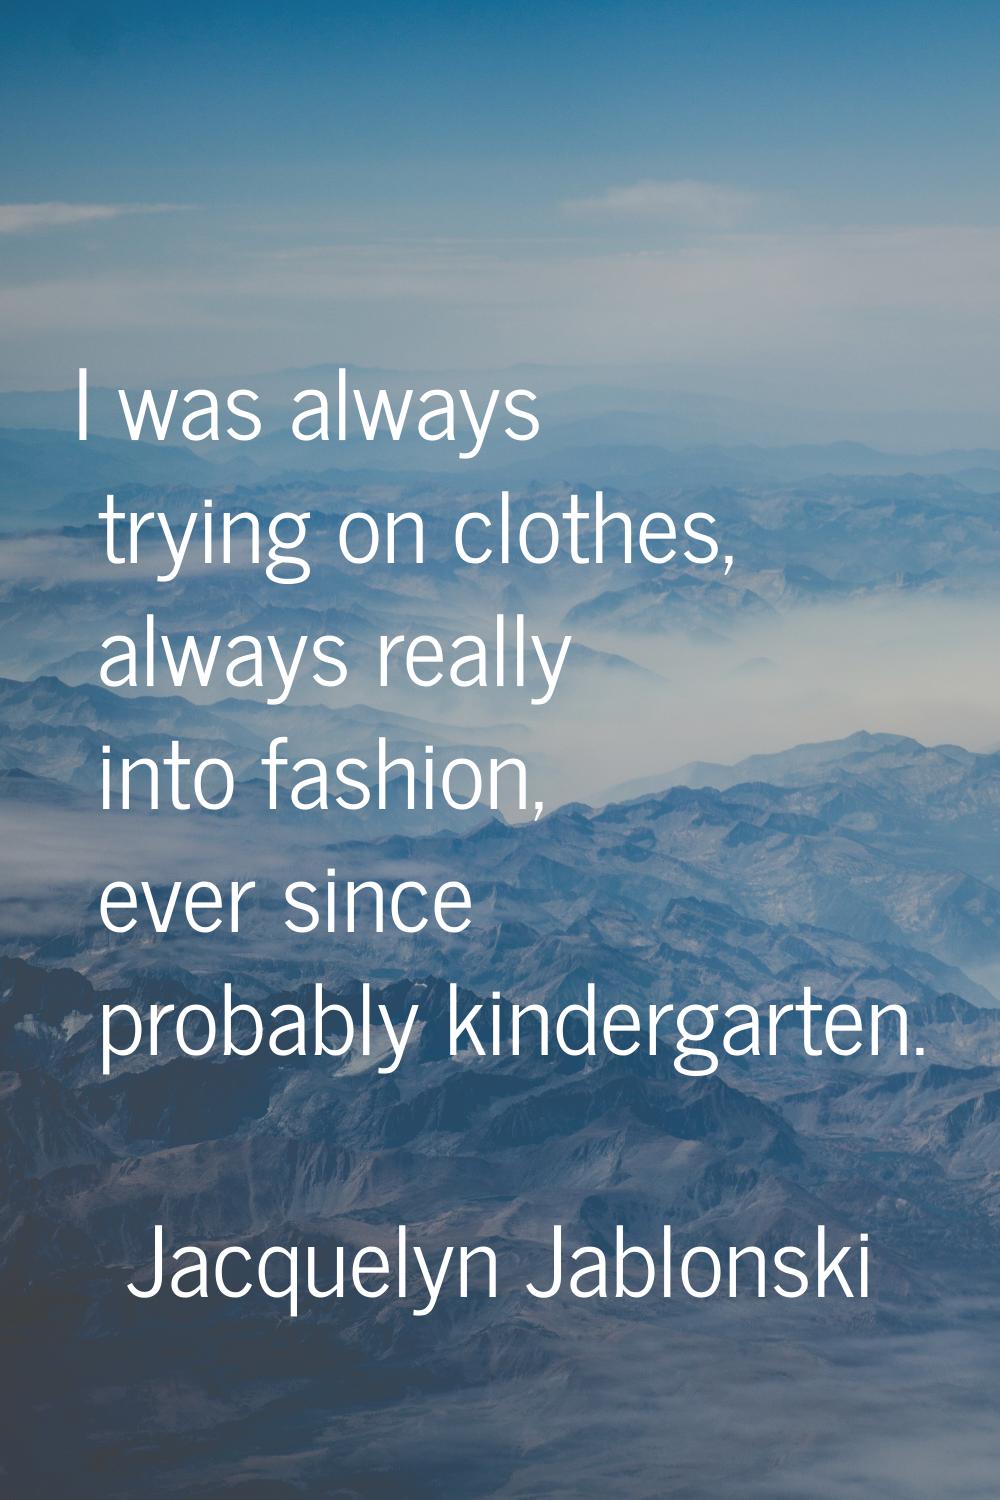 I was always trying on clothes, always really into fashion, ever since probably kindergarten.